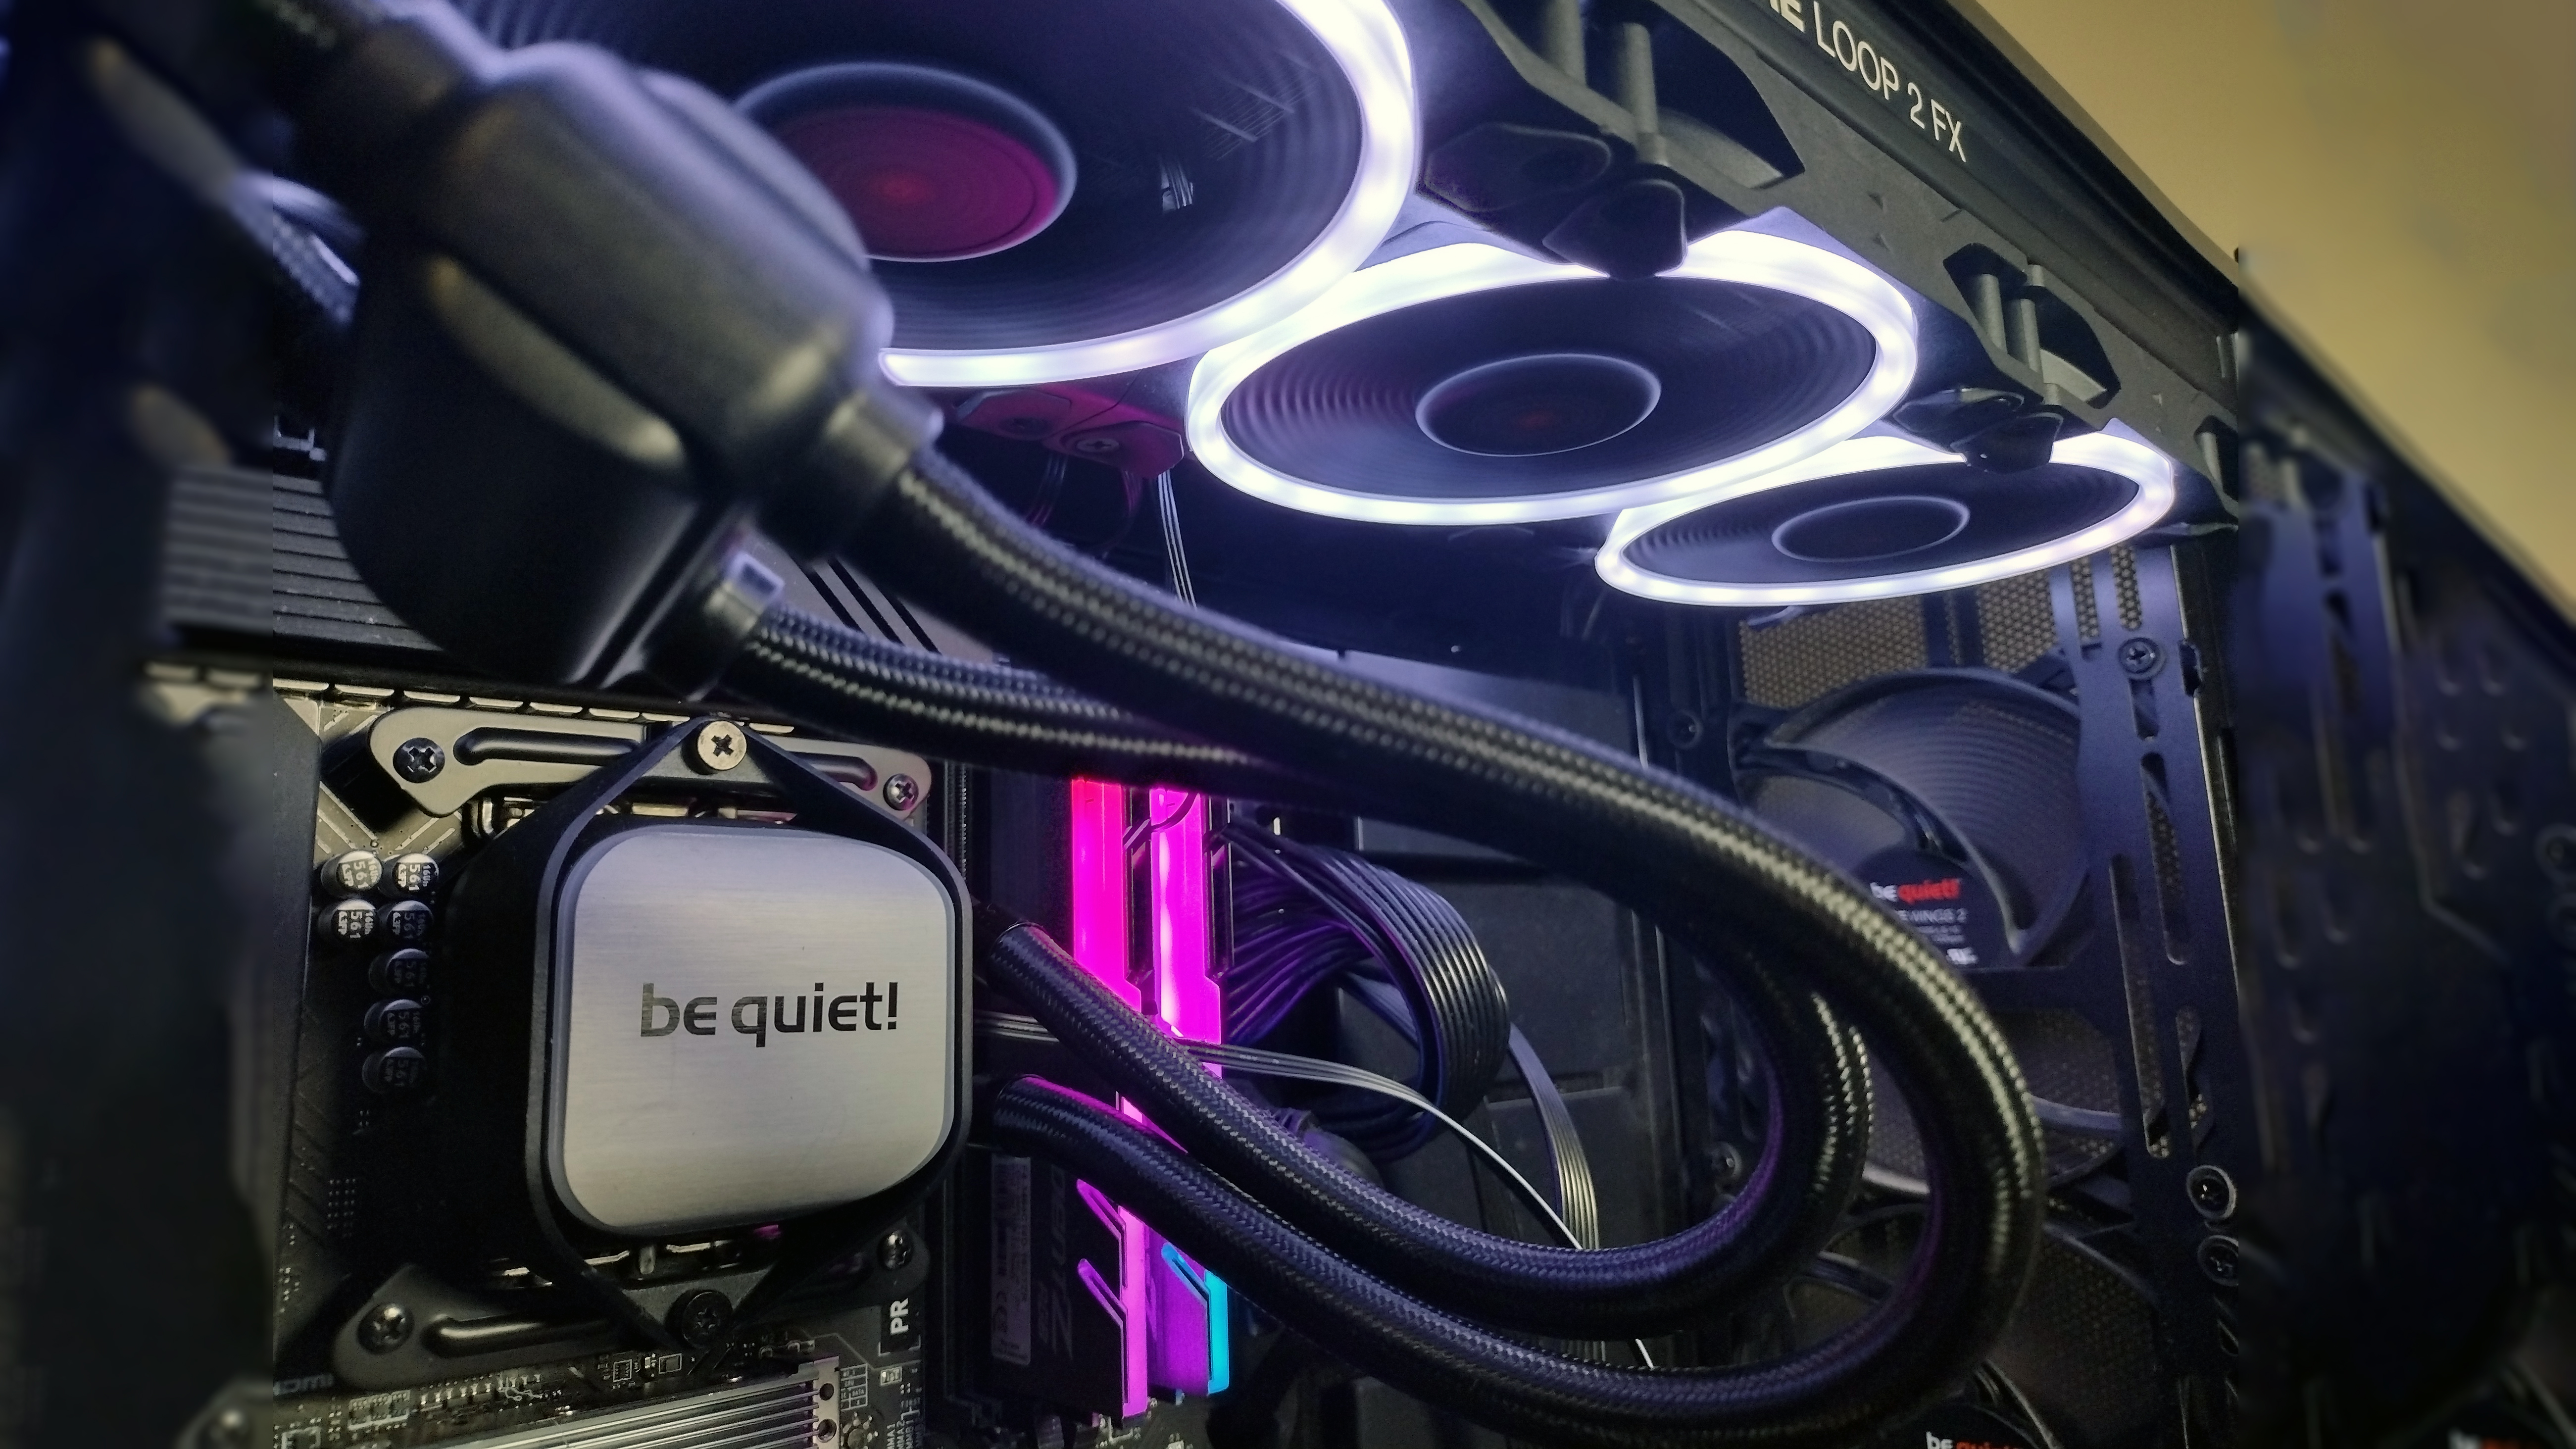 Silent Air coolers for your PC from be quiet!